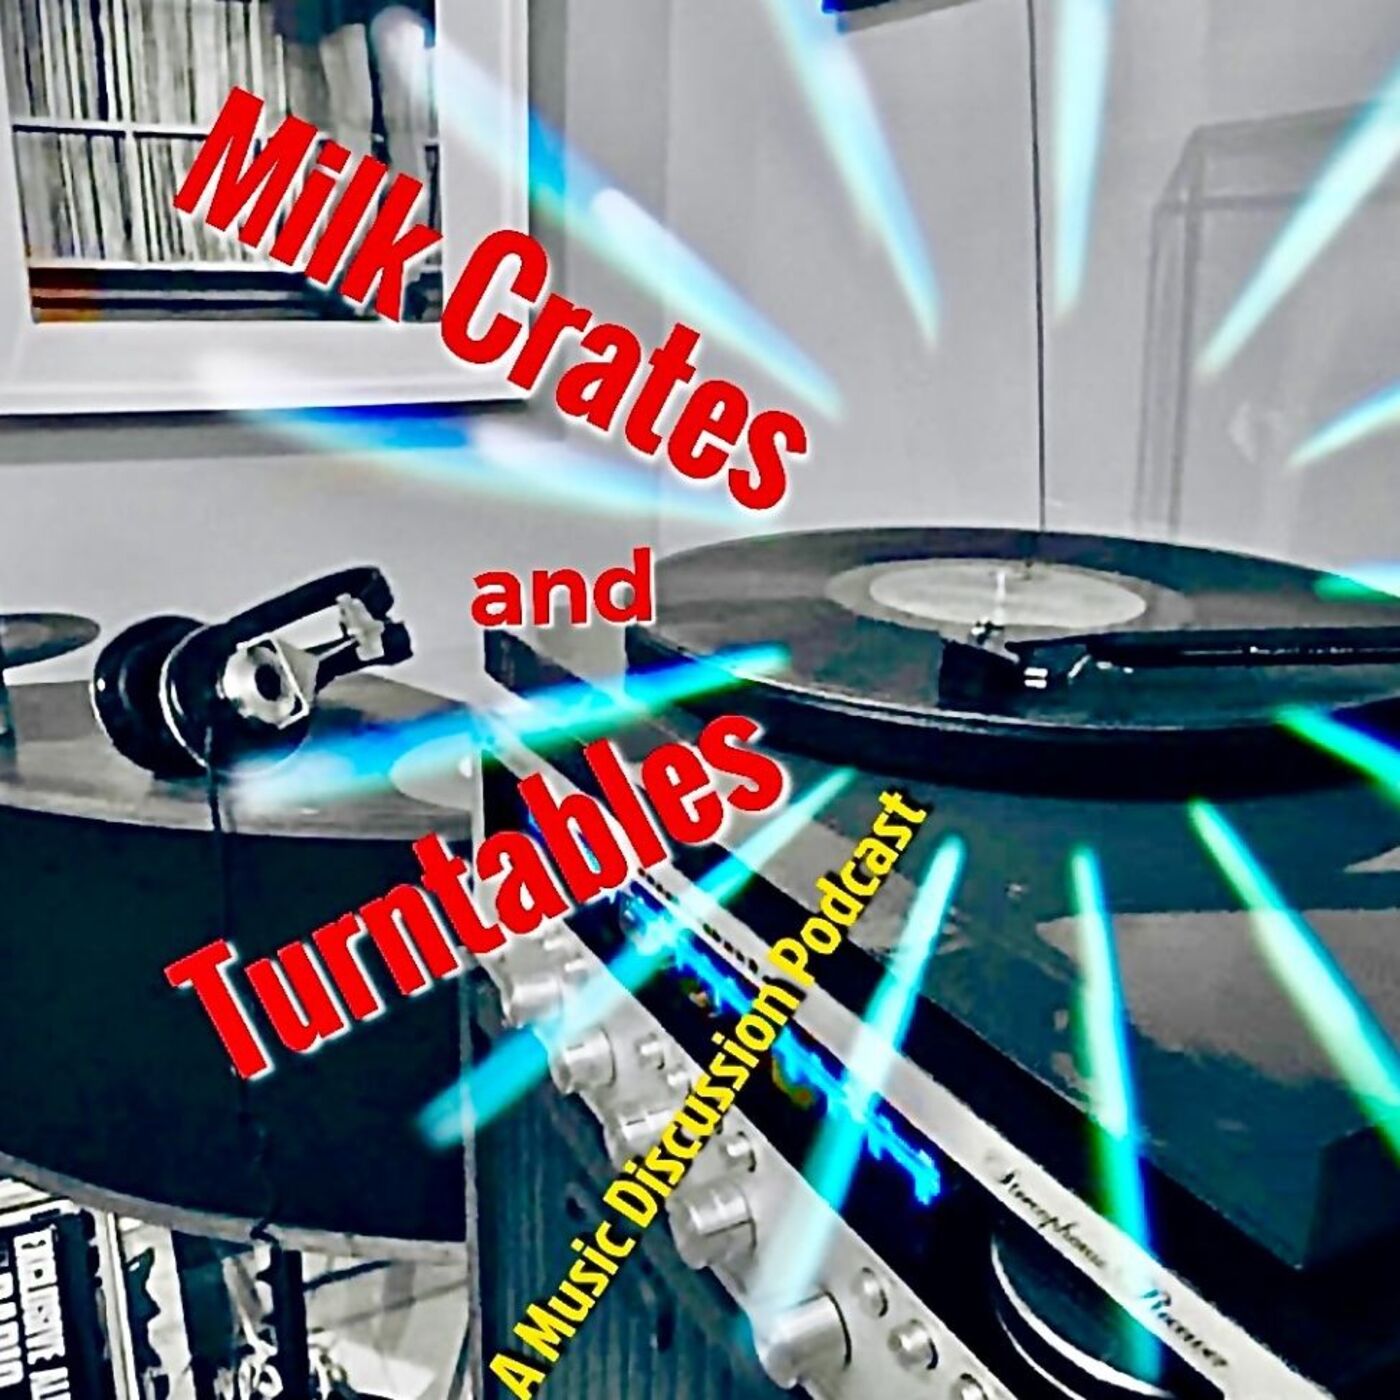 Fresh update on "lyman" discussed on Milk Crates and Turntables. A Music Discussion Podcast